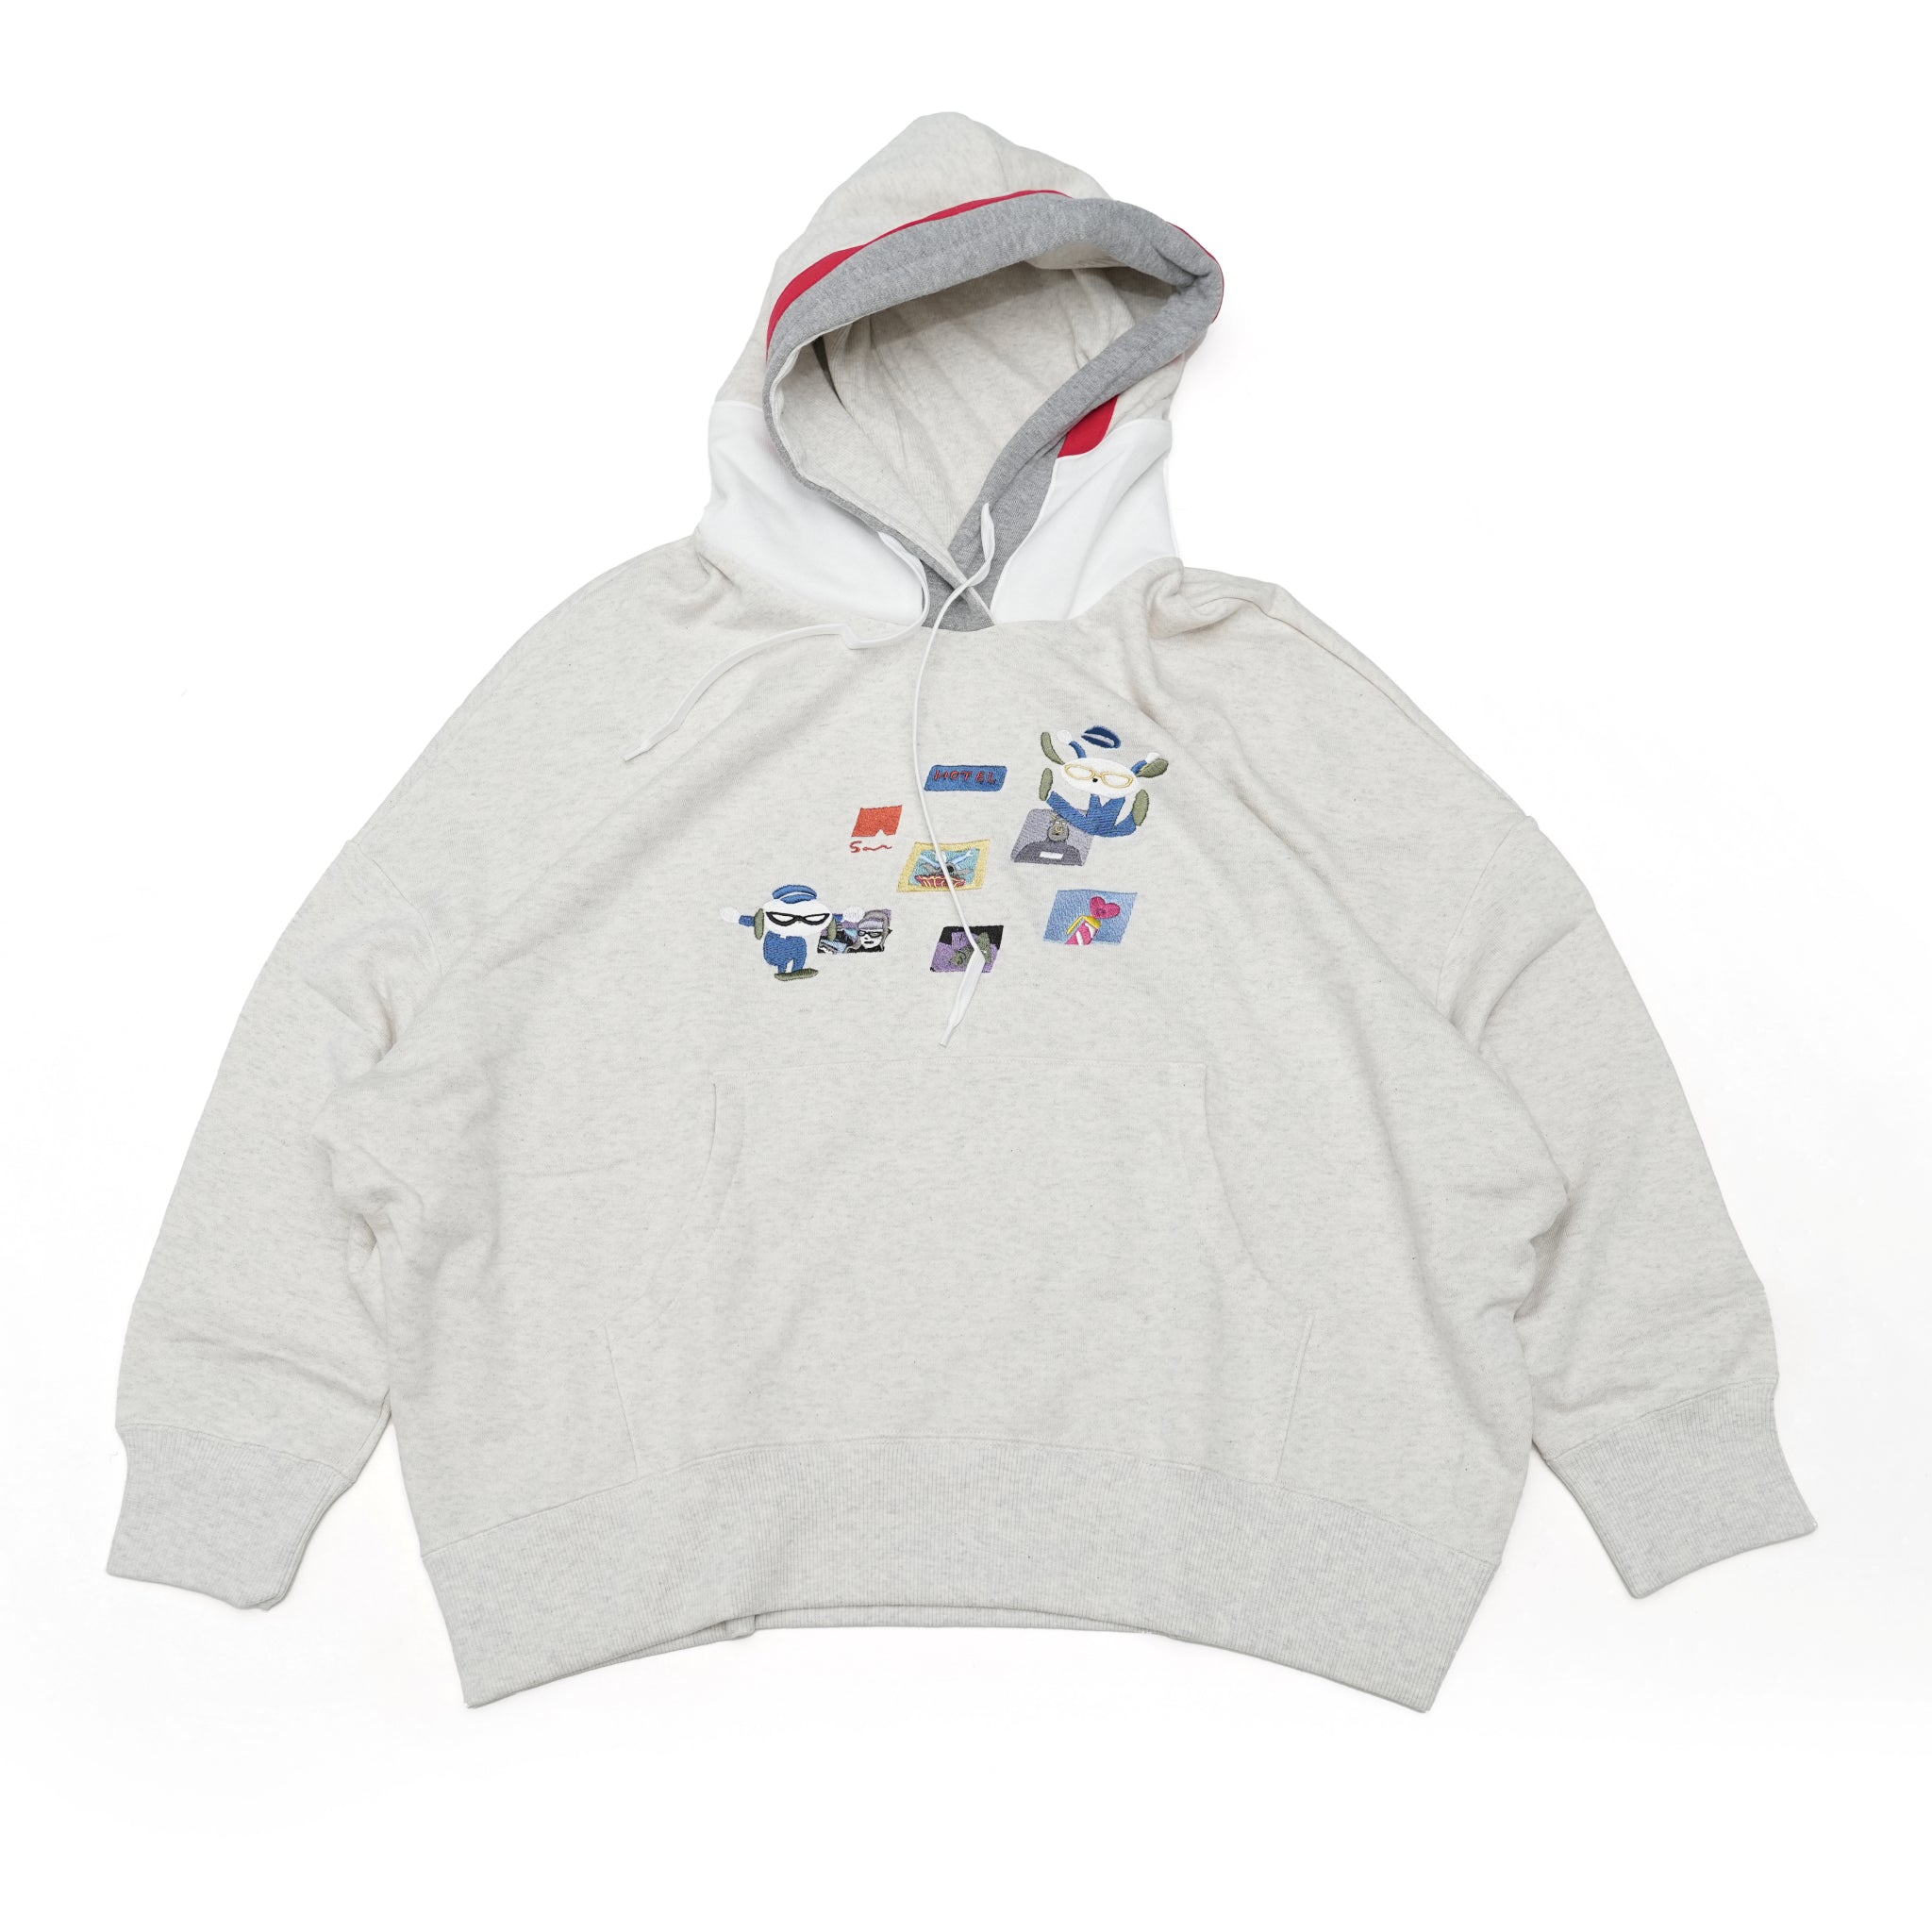 No:bsdodd-03_a | Name:City Scenery Embroidery Hoodie | Color:Oat Meal【BEDSIDEDRAMA_ベッドサイドドラマ】